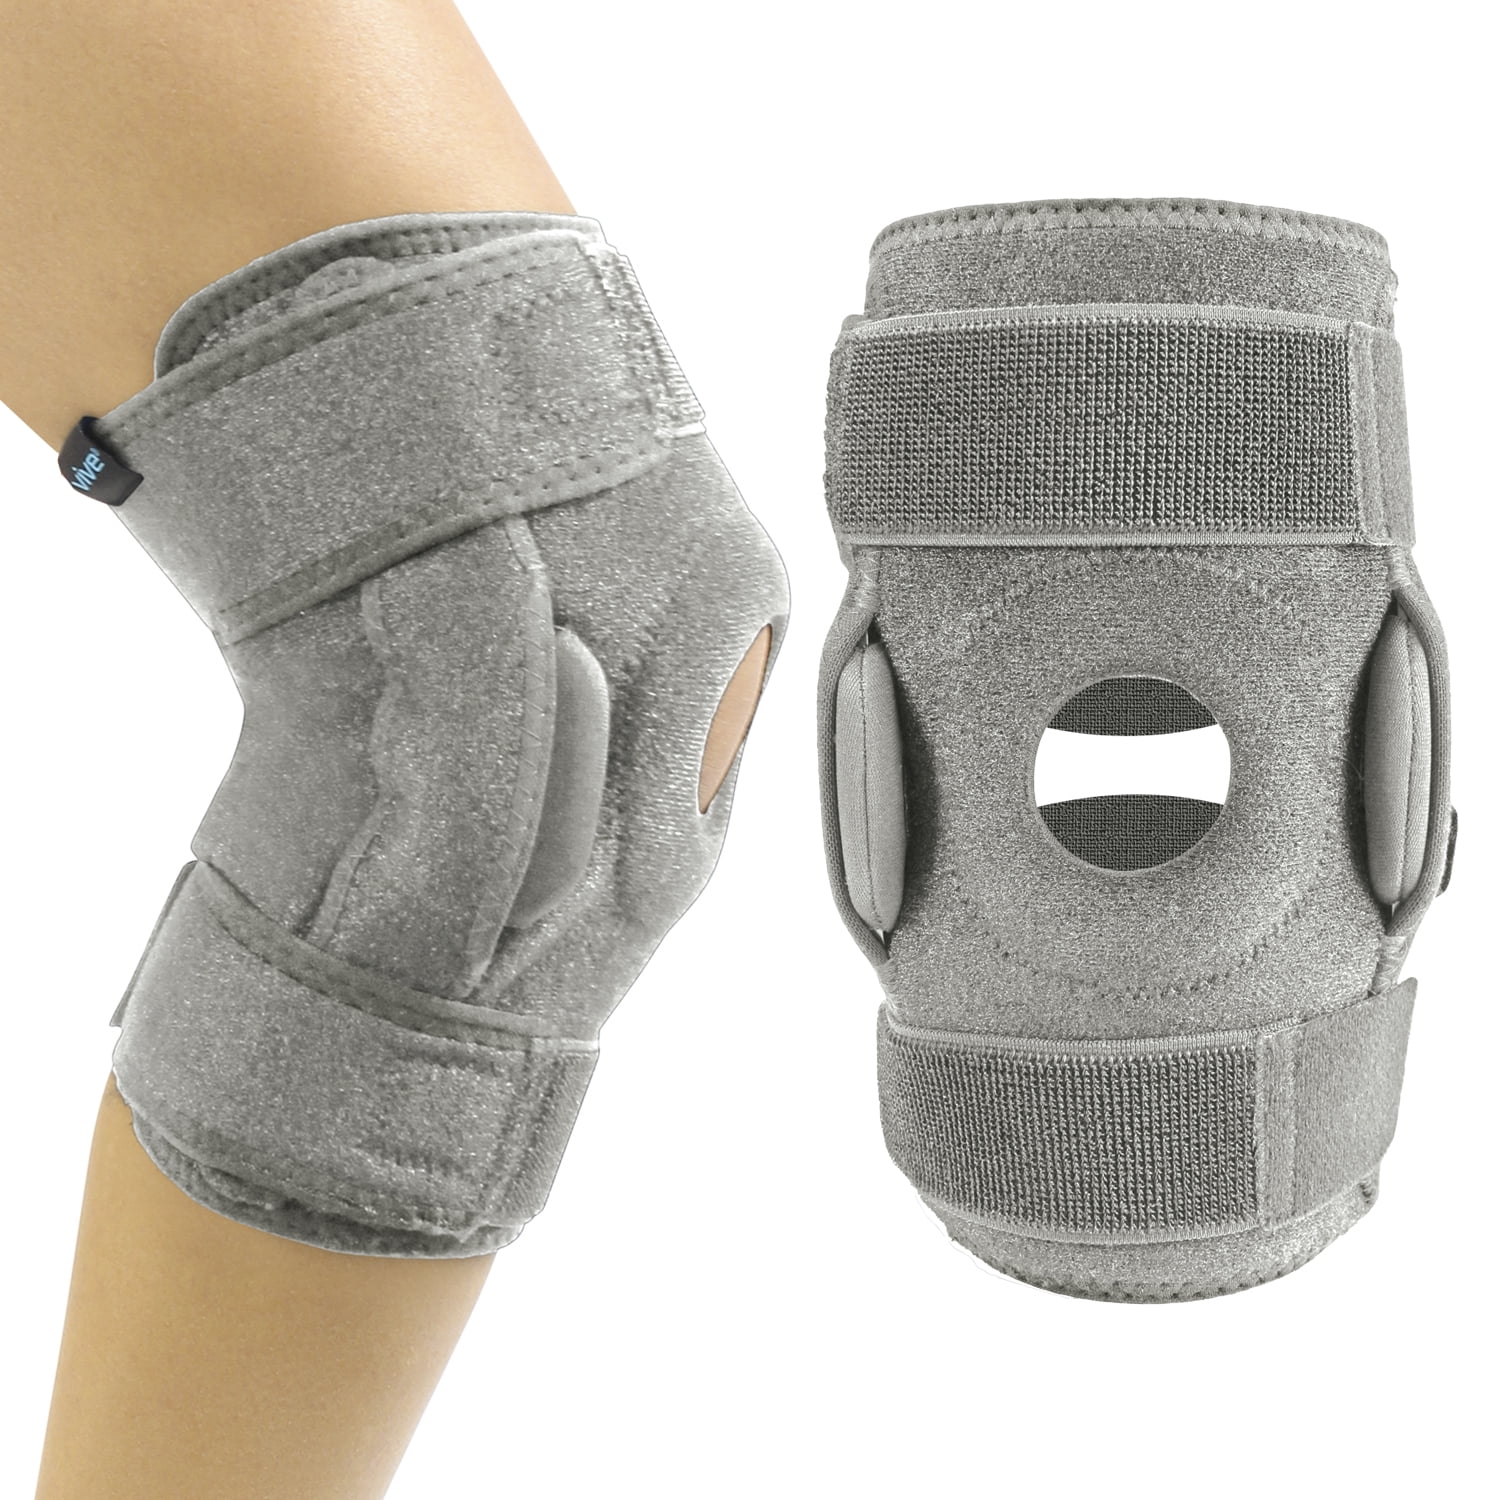 Hinged ROM Knee Brace by Vive Health - FREE Shipping